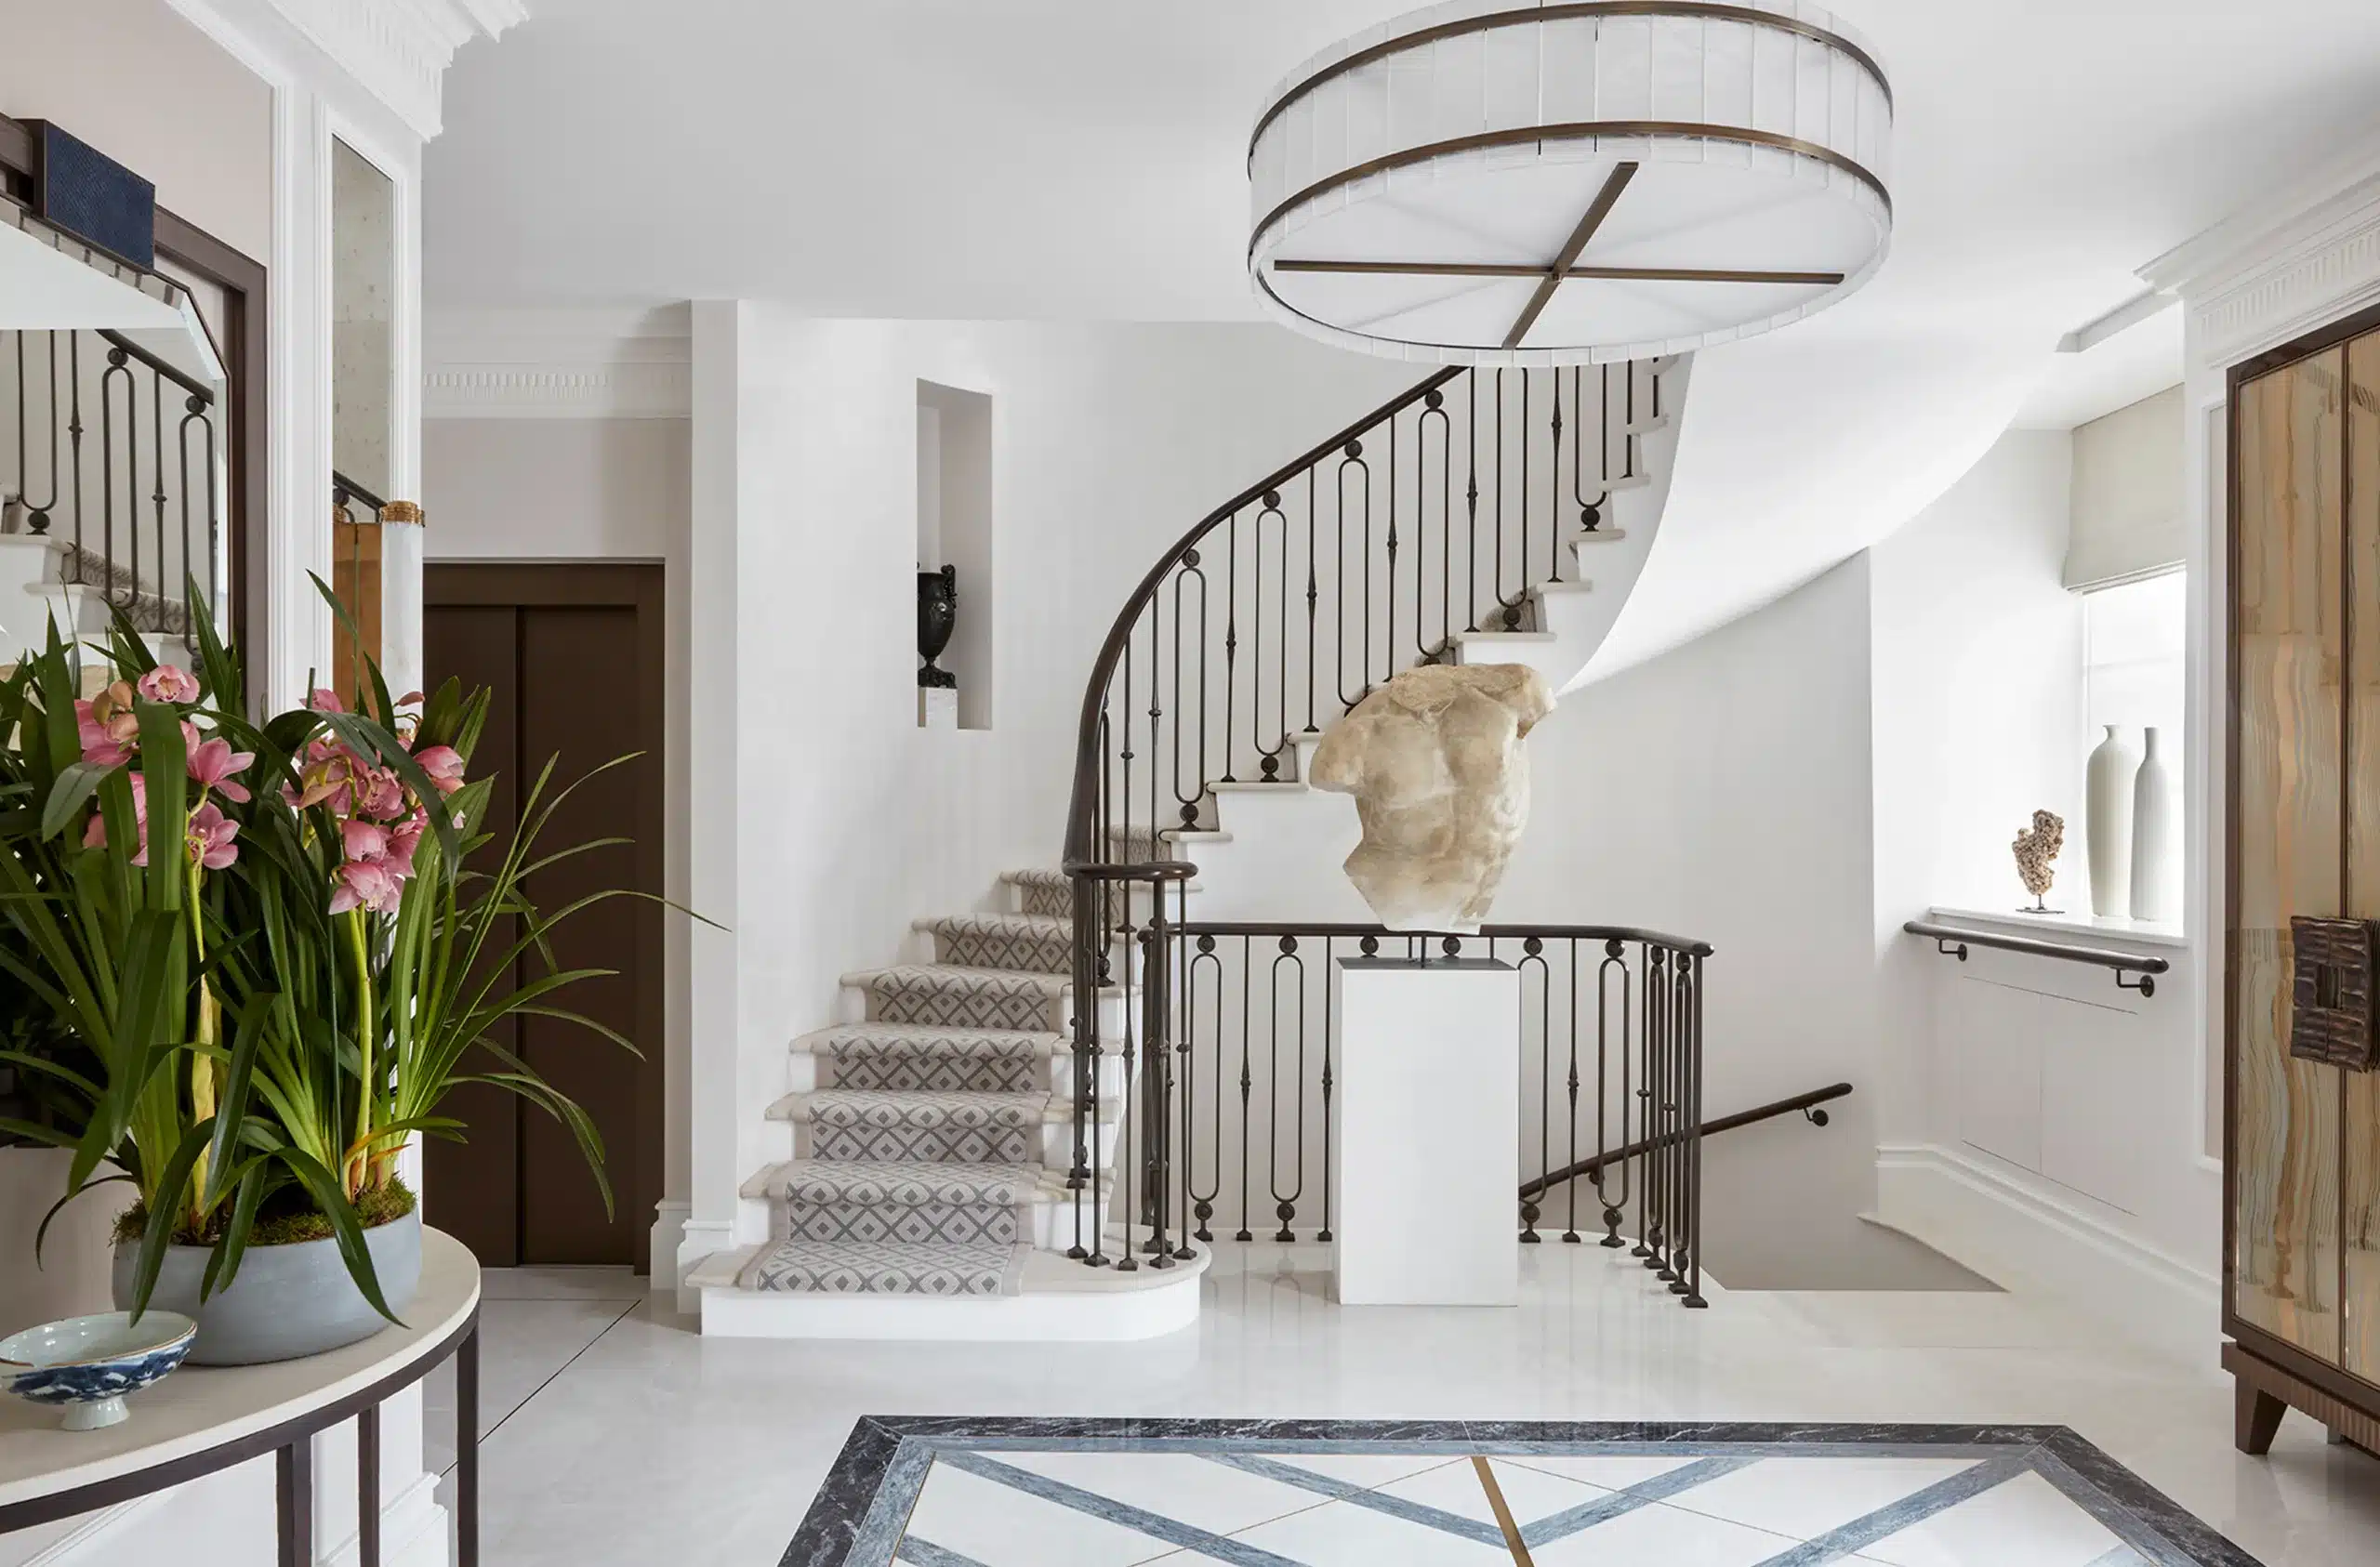 An entryway in a kensington interior design project by katharine pooley, the uk's best interior designer